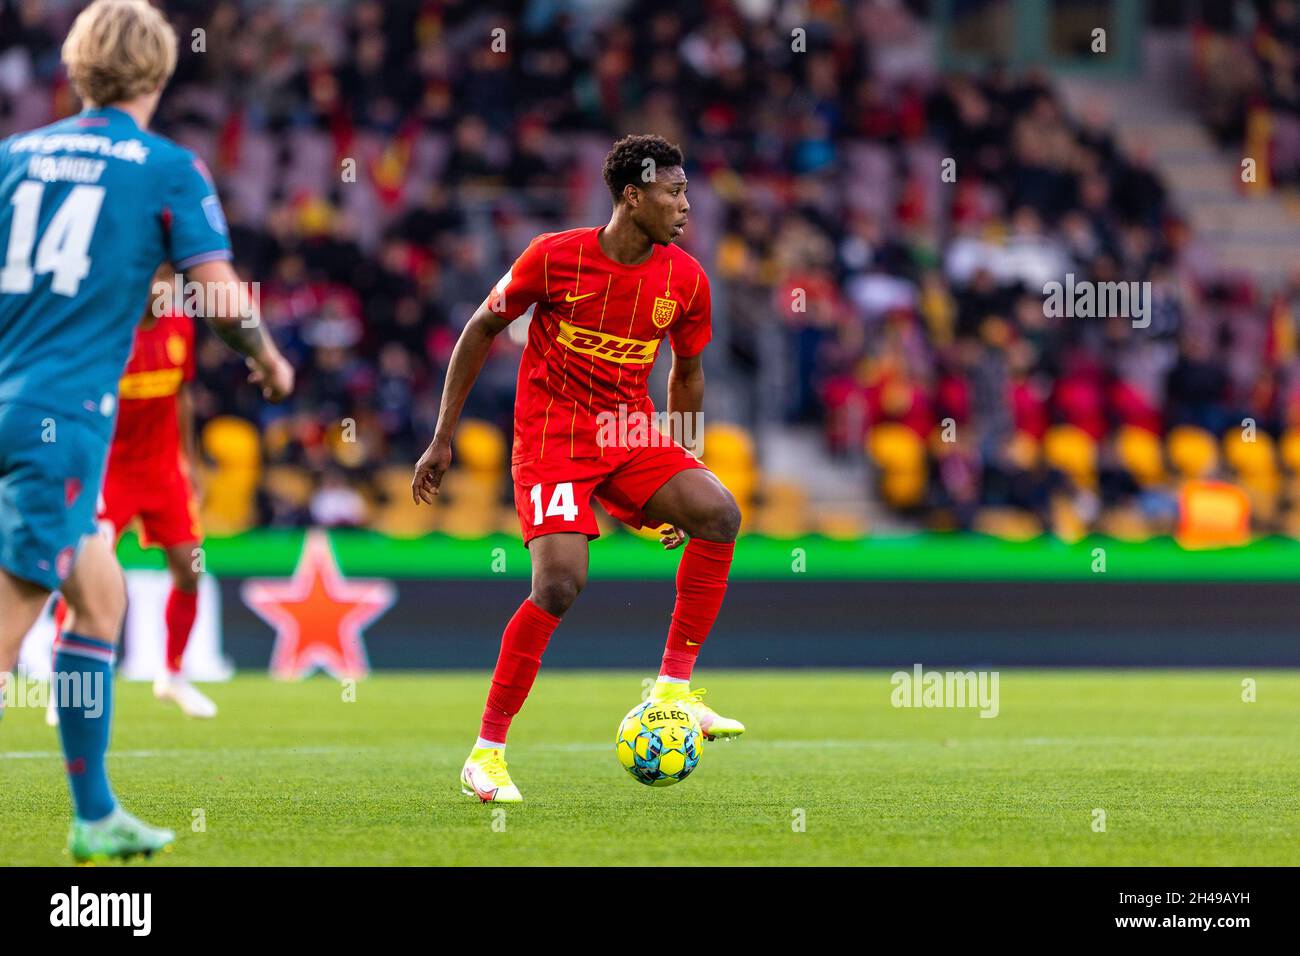 Farum, Denmark. 31st, October 2021. Abu Francis (14) of FC Nordsjaelland  seen during the 3F Superliga match between FC Nordsjaelland and Aalborg  Fodbold in Right to Dream Park in Farum, Denmark. (Photo